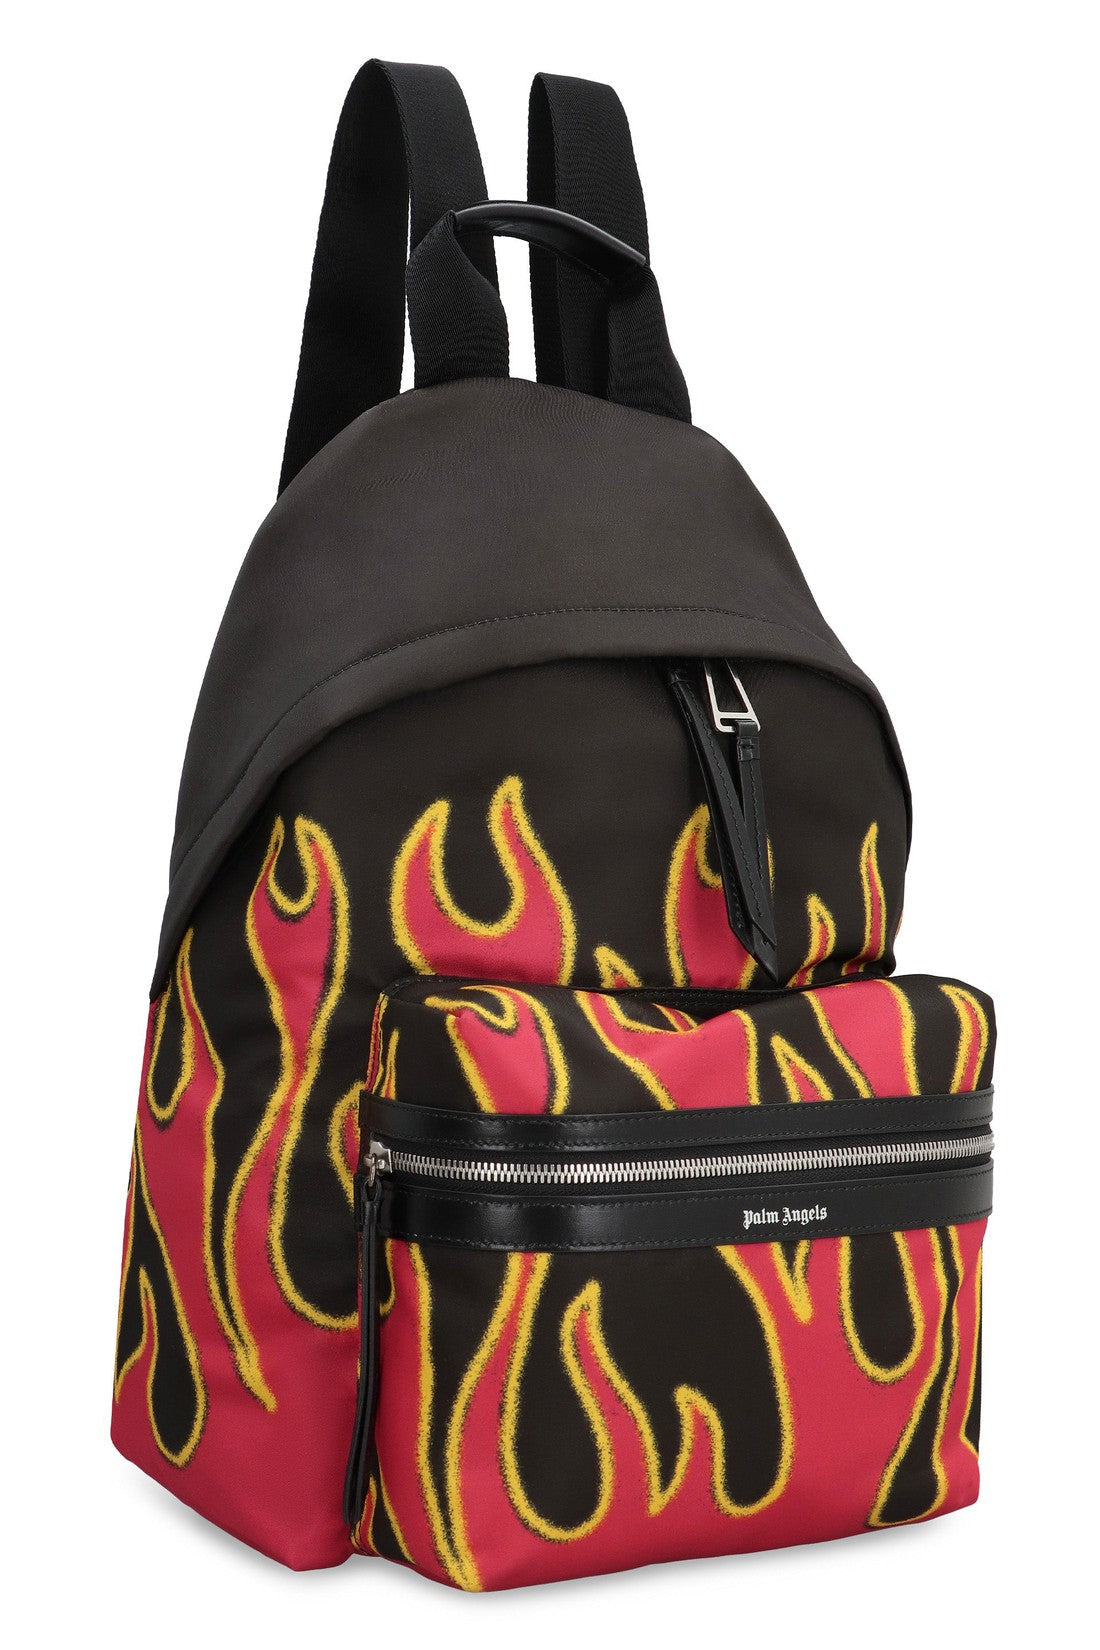 Palm Angels-OUTLET-SALE-Printed nylon backpack-ARCHIVIST